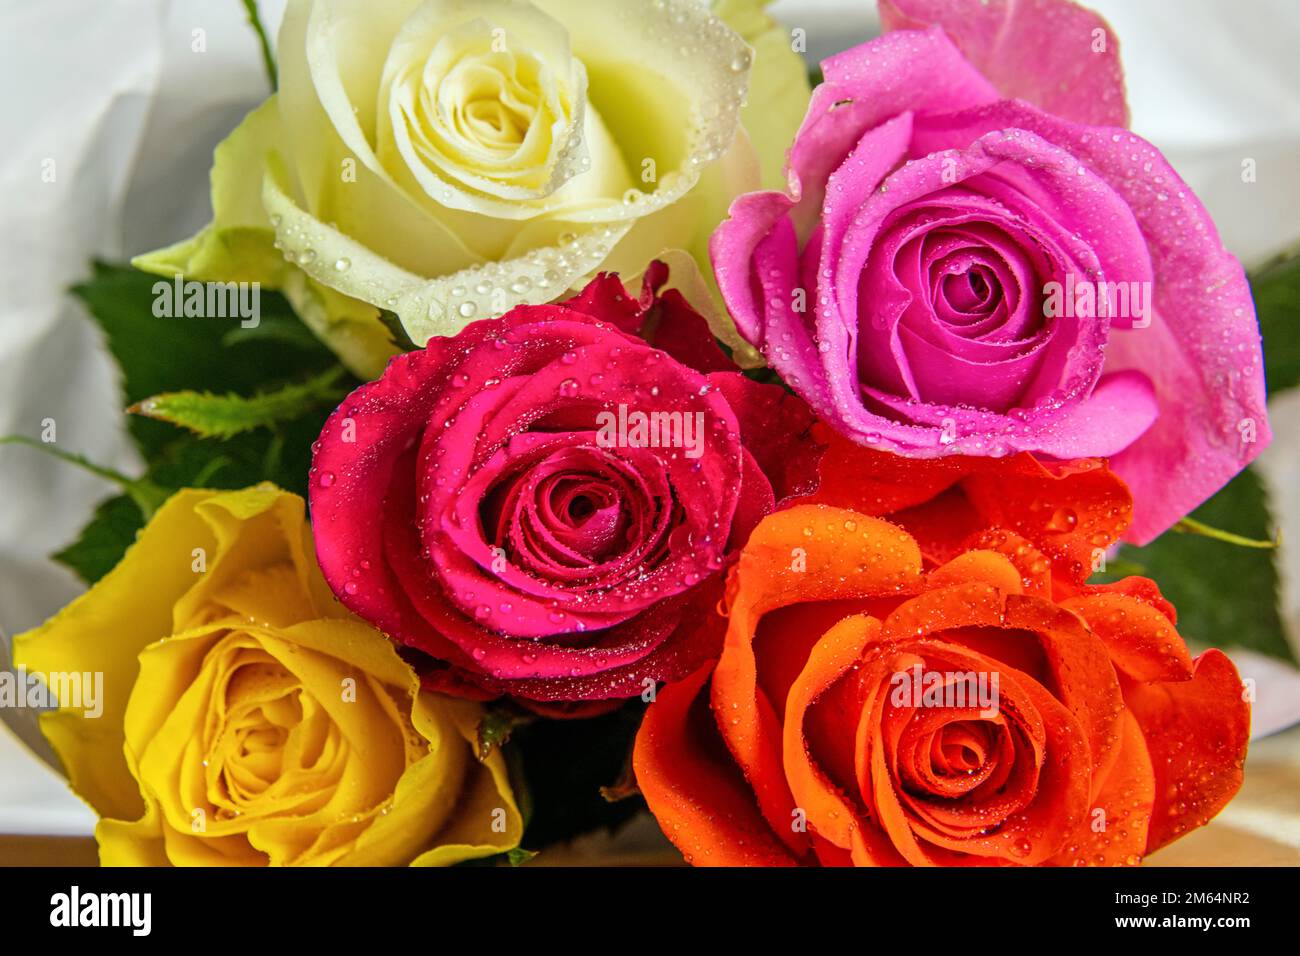 Roses flowerheads in different colors with rain drops to offer as gift Stock Photo